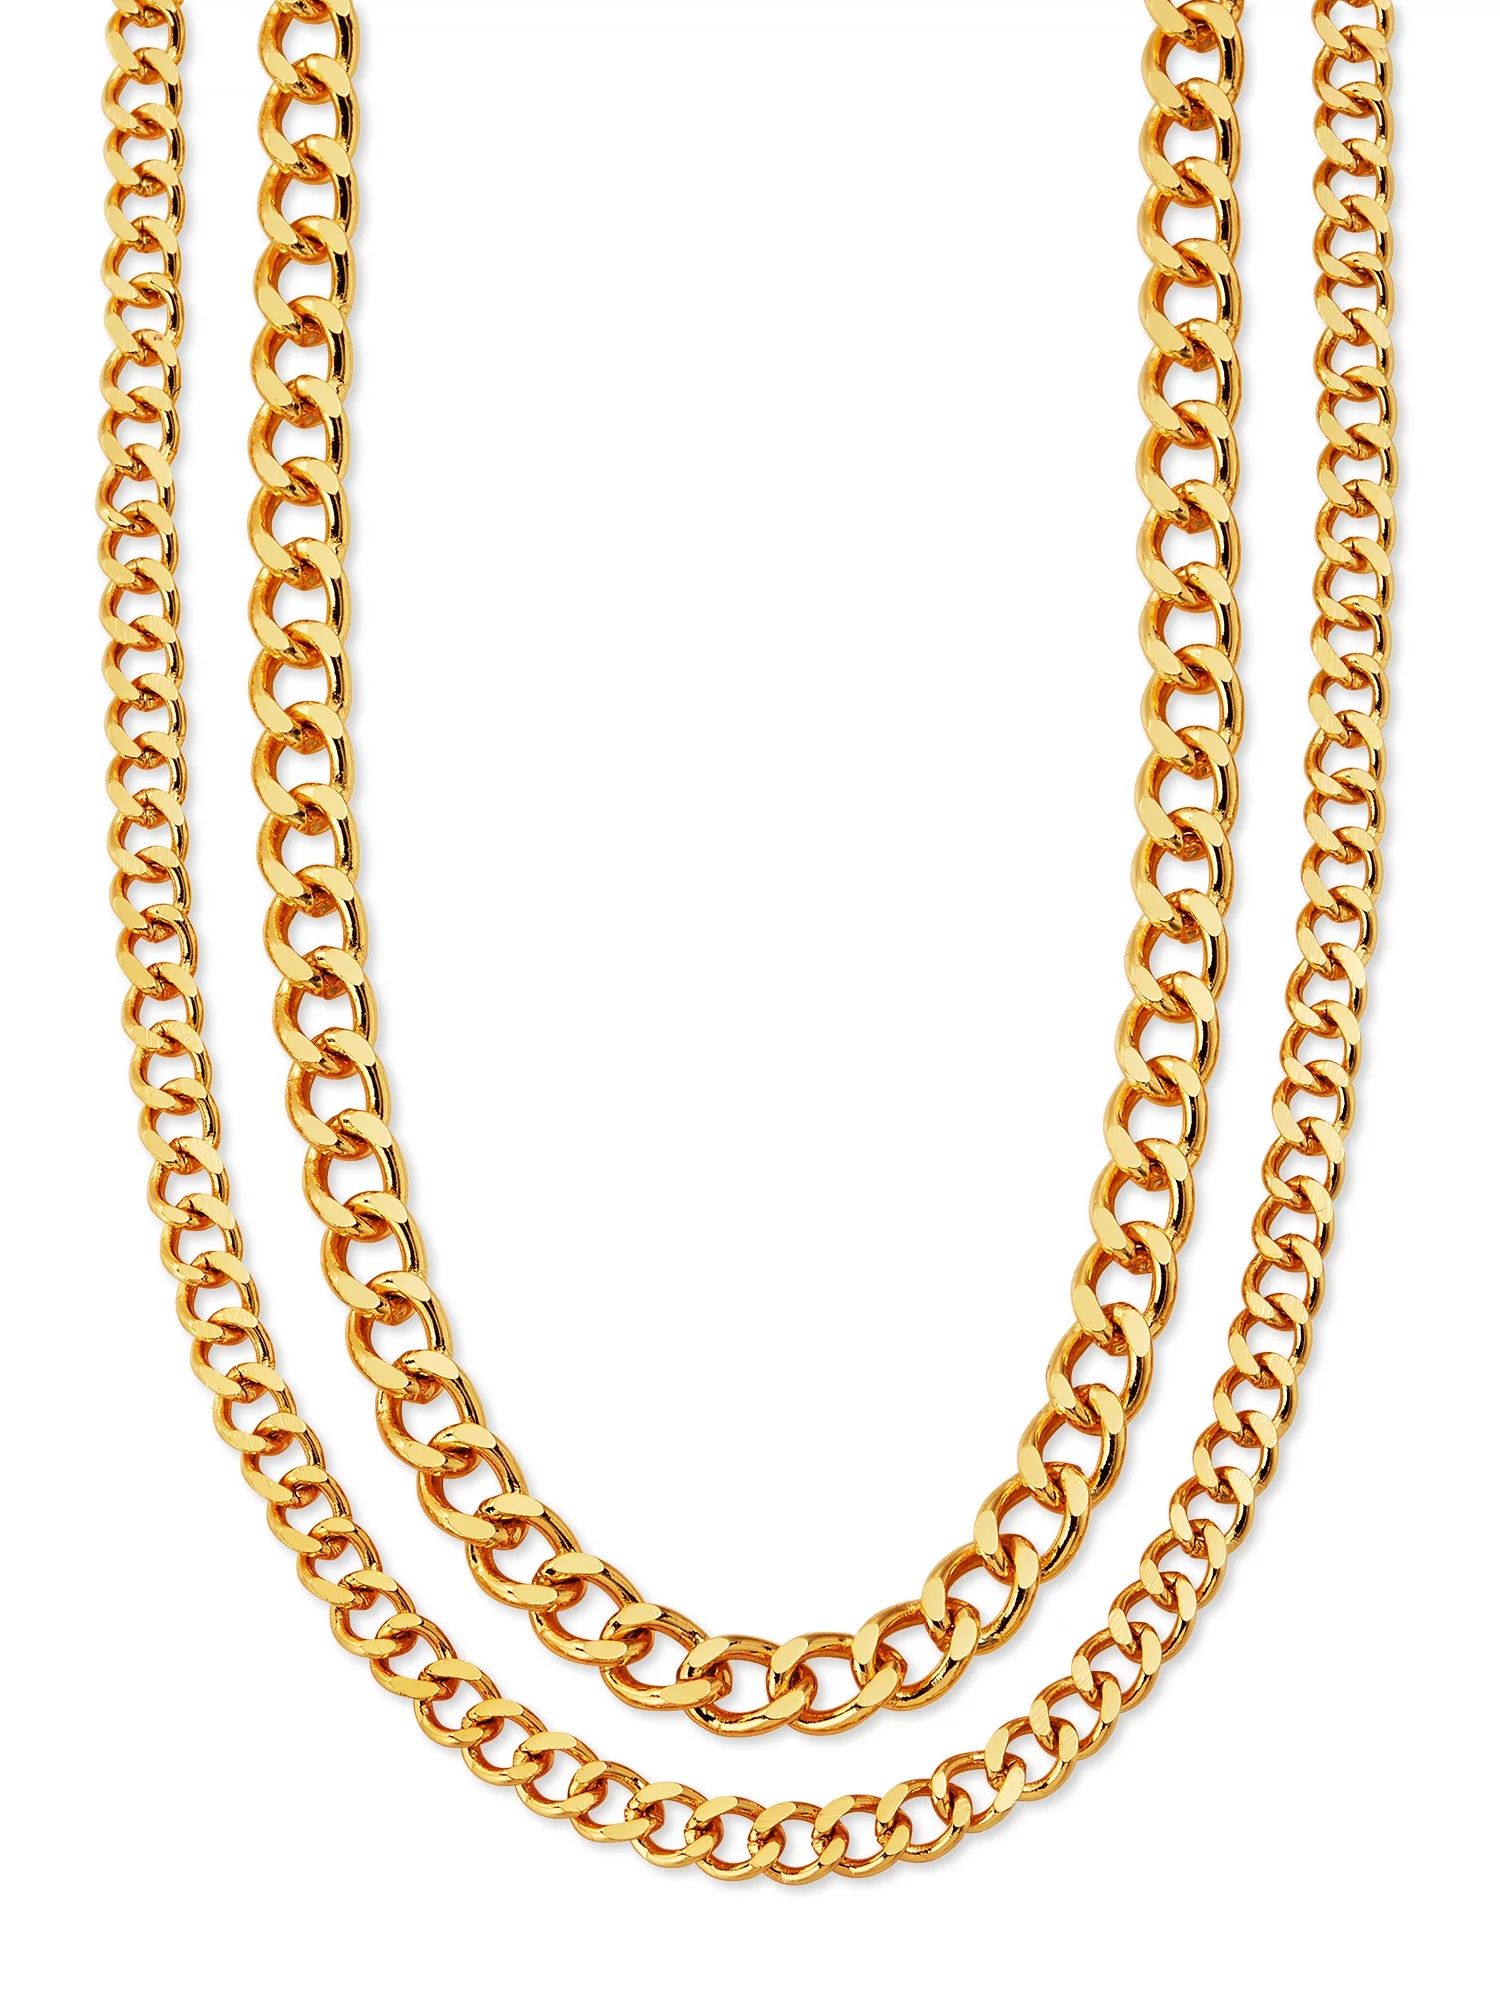 Scoop Brass Yellow Gold-Plated Layered Link Chain Necklace, 14.5" + 4" Extender | Walmart (US)